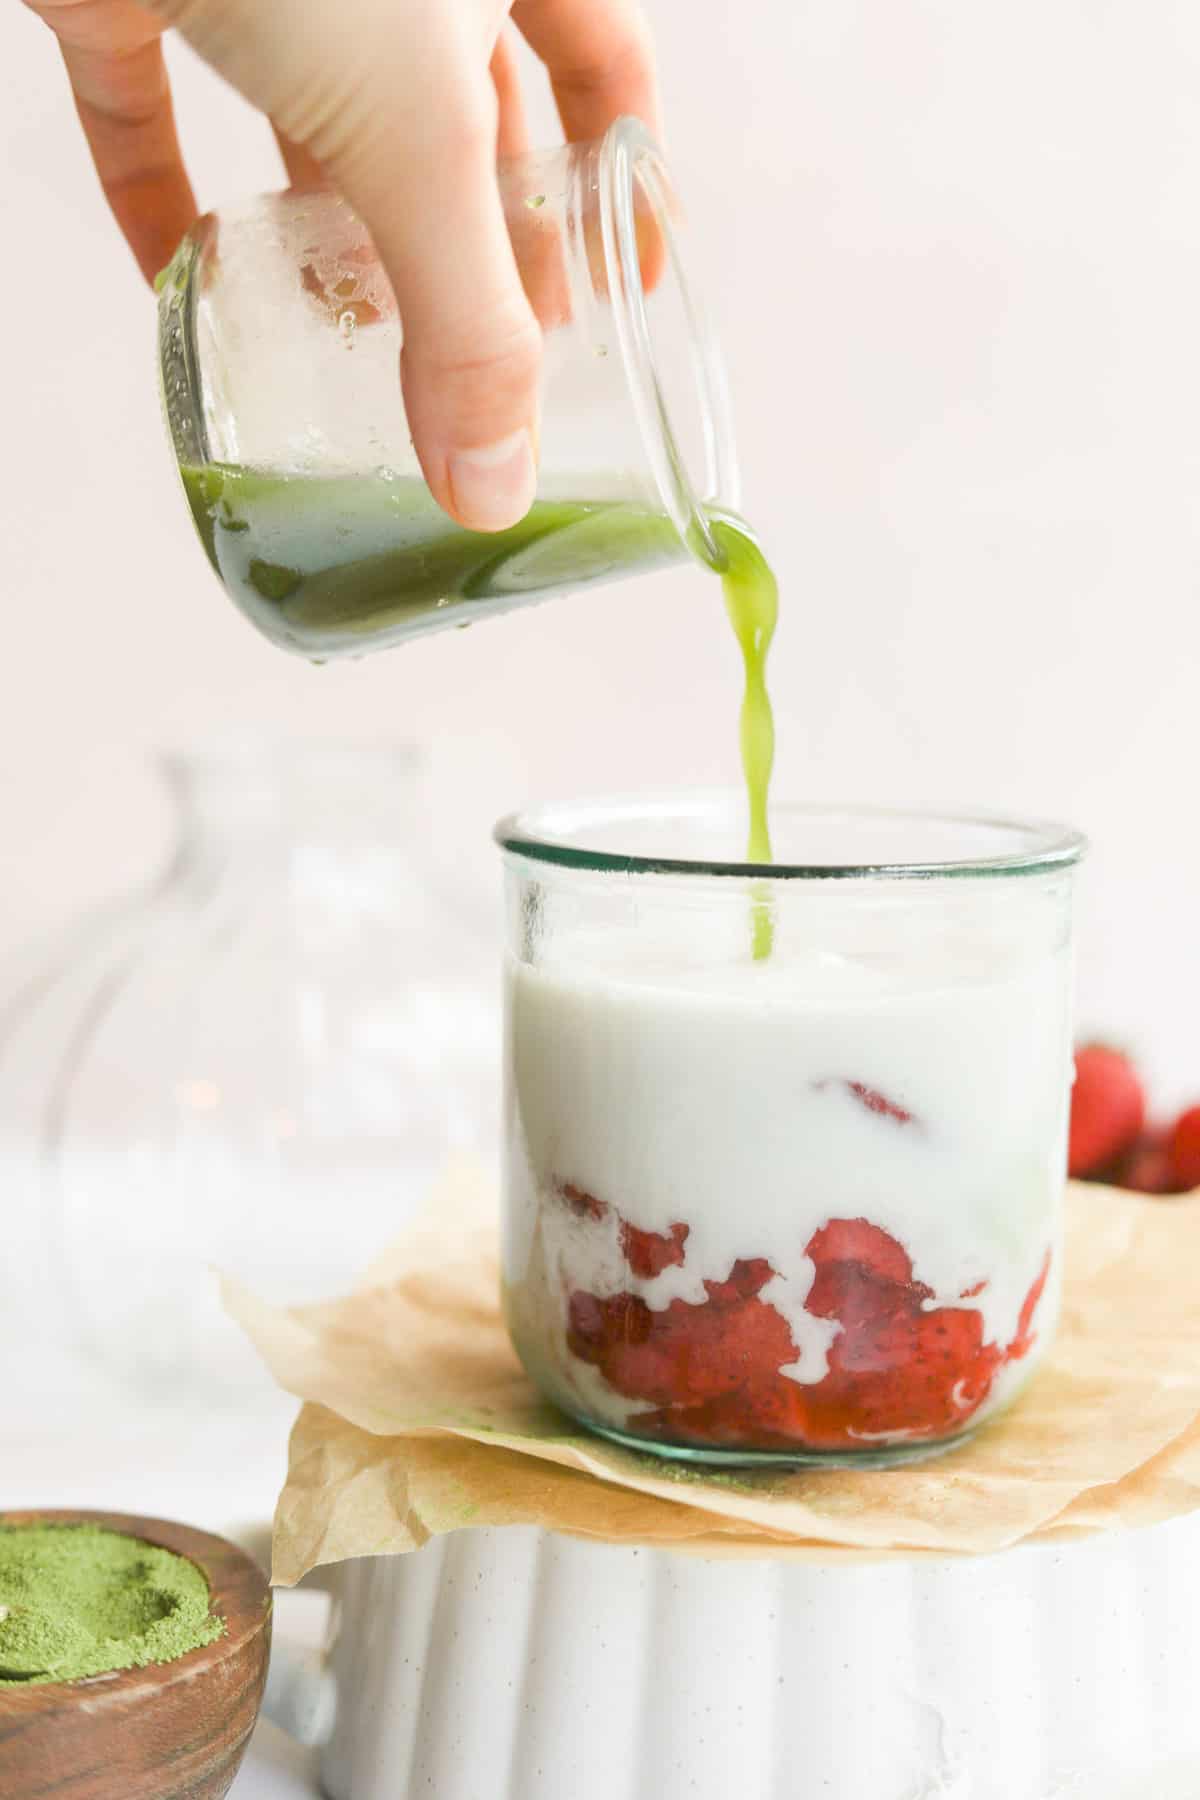 matcha being poured over a glass of milk and strawberries.